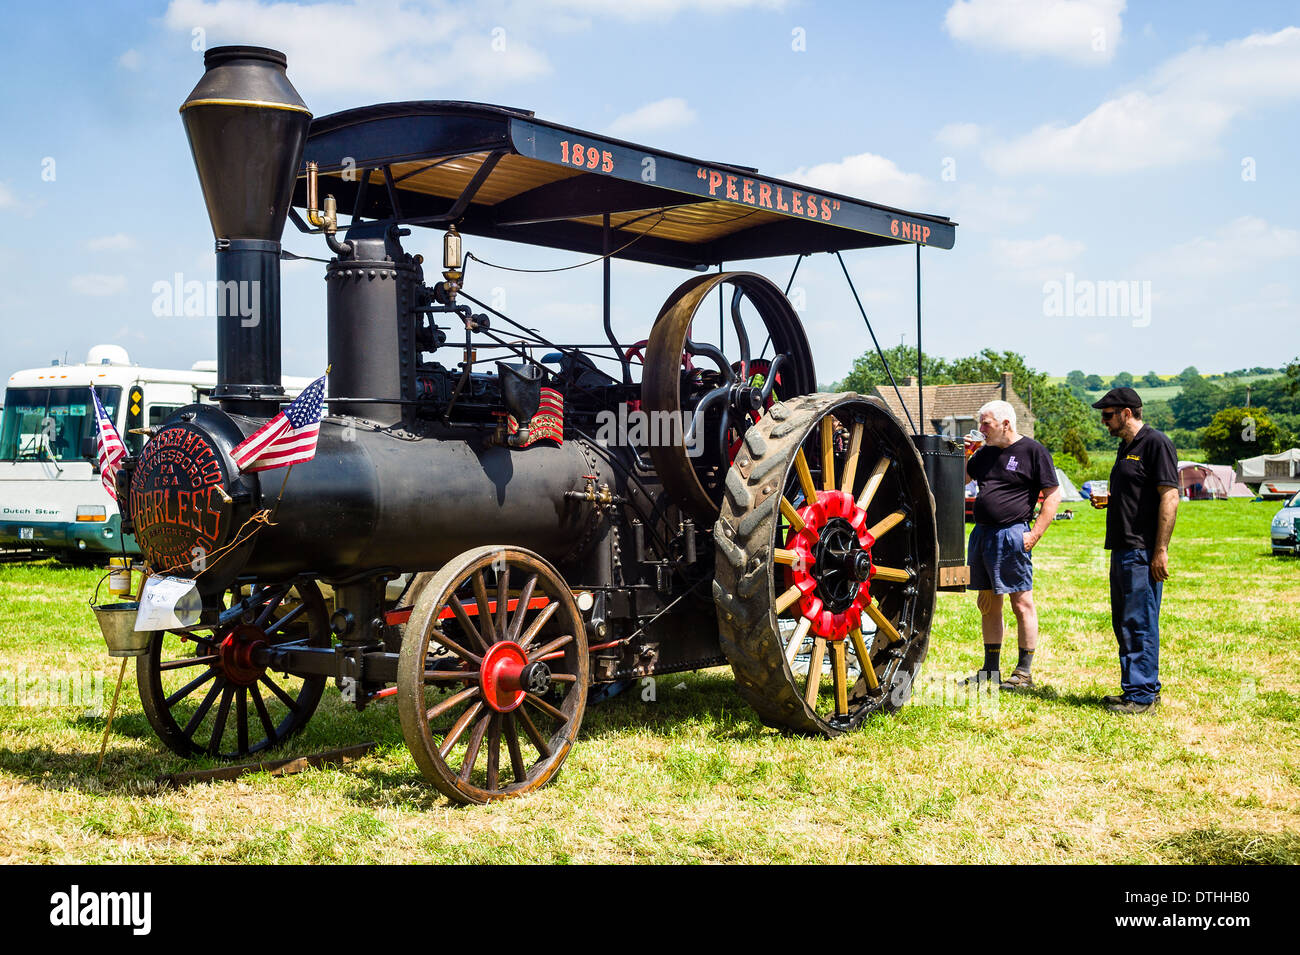 American PEERLESS steam traction engine at a country event in UK Stock Photo